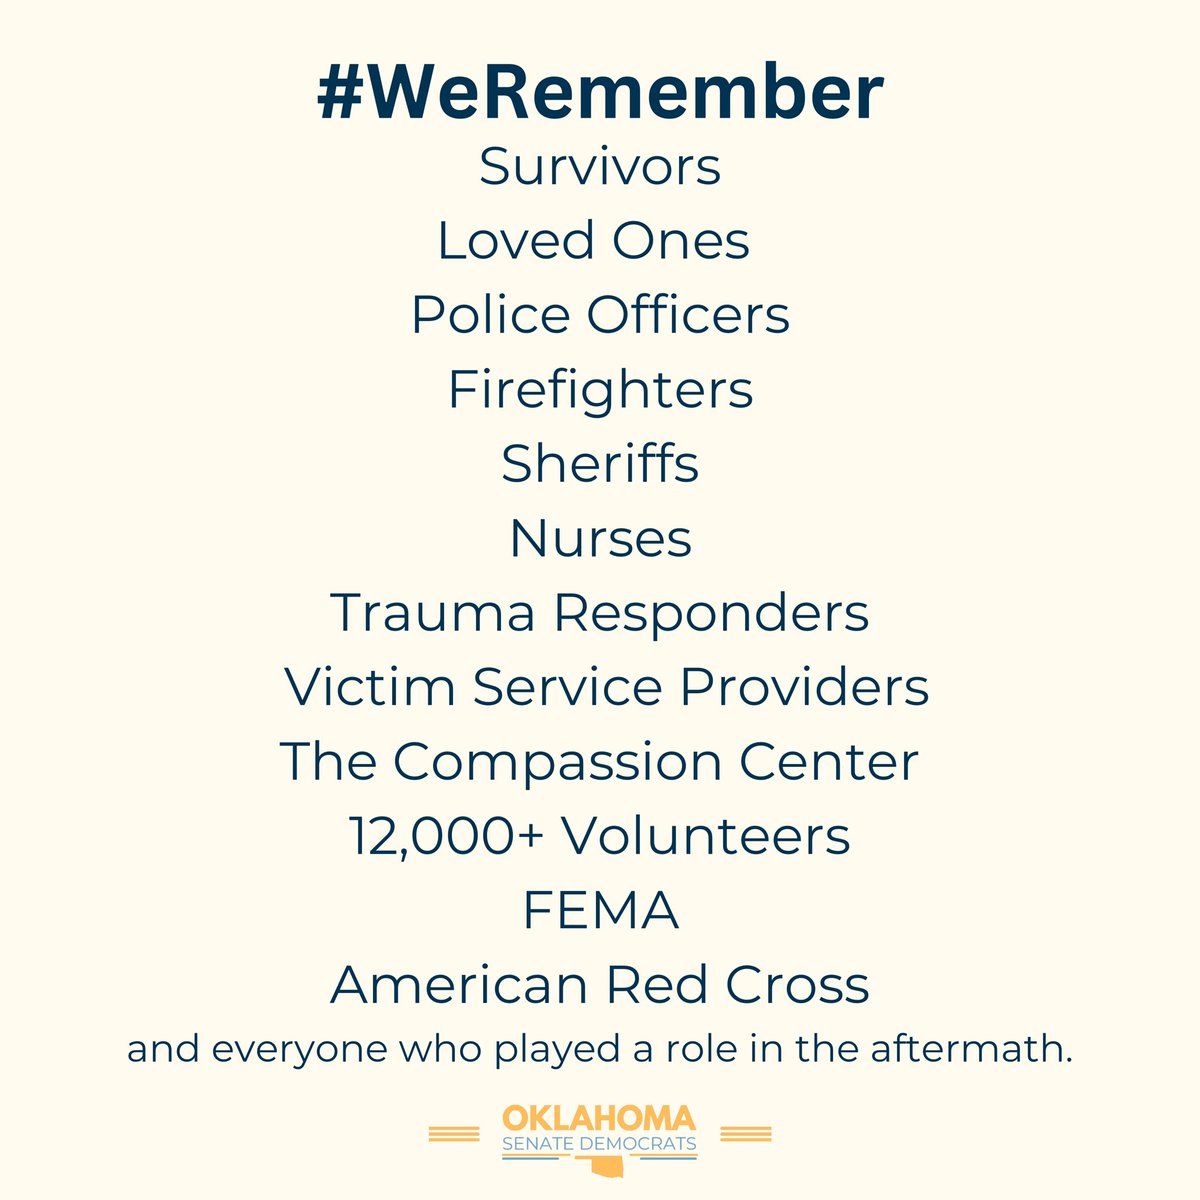 We honor the 168 lives lost & all those whose lives were forever changed. We continue to thank all of the first responders, agencies, and volunteers who stepped up to care for our community in the wake of this tragedy. Reject extremism & take care of one another #OklahomaStandard